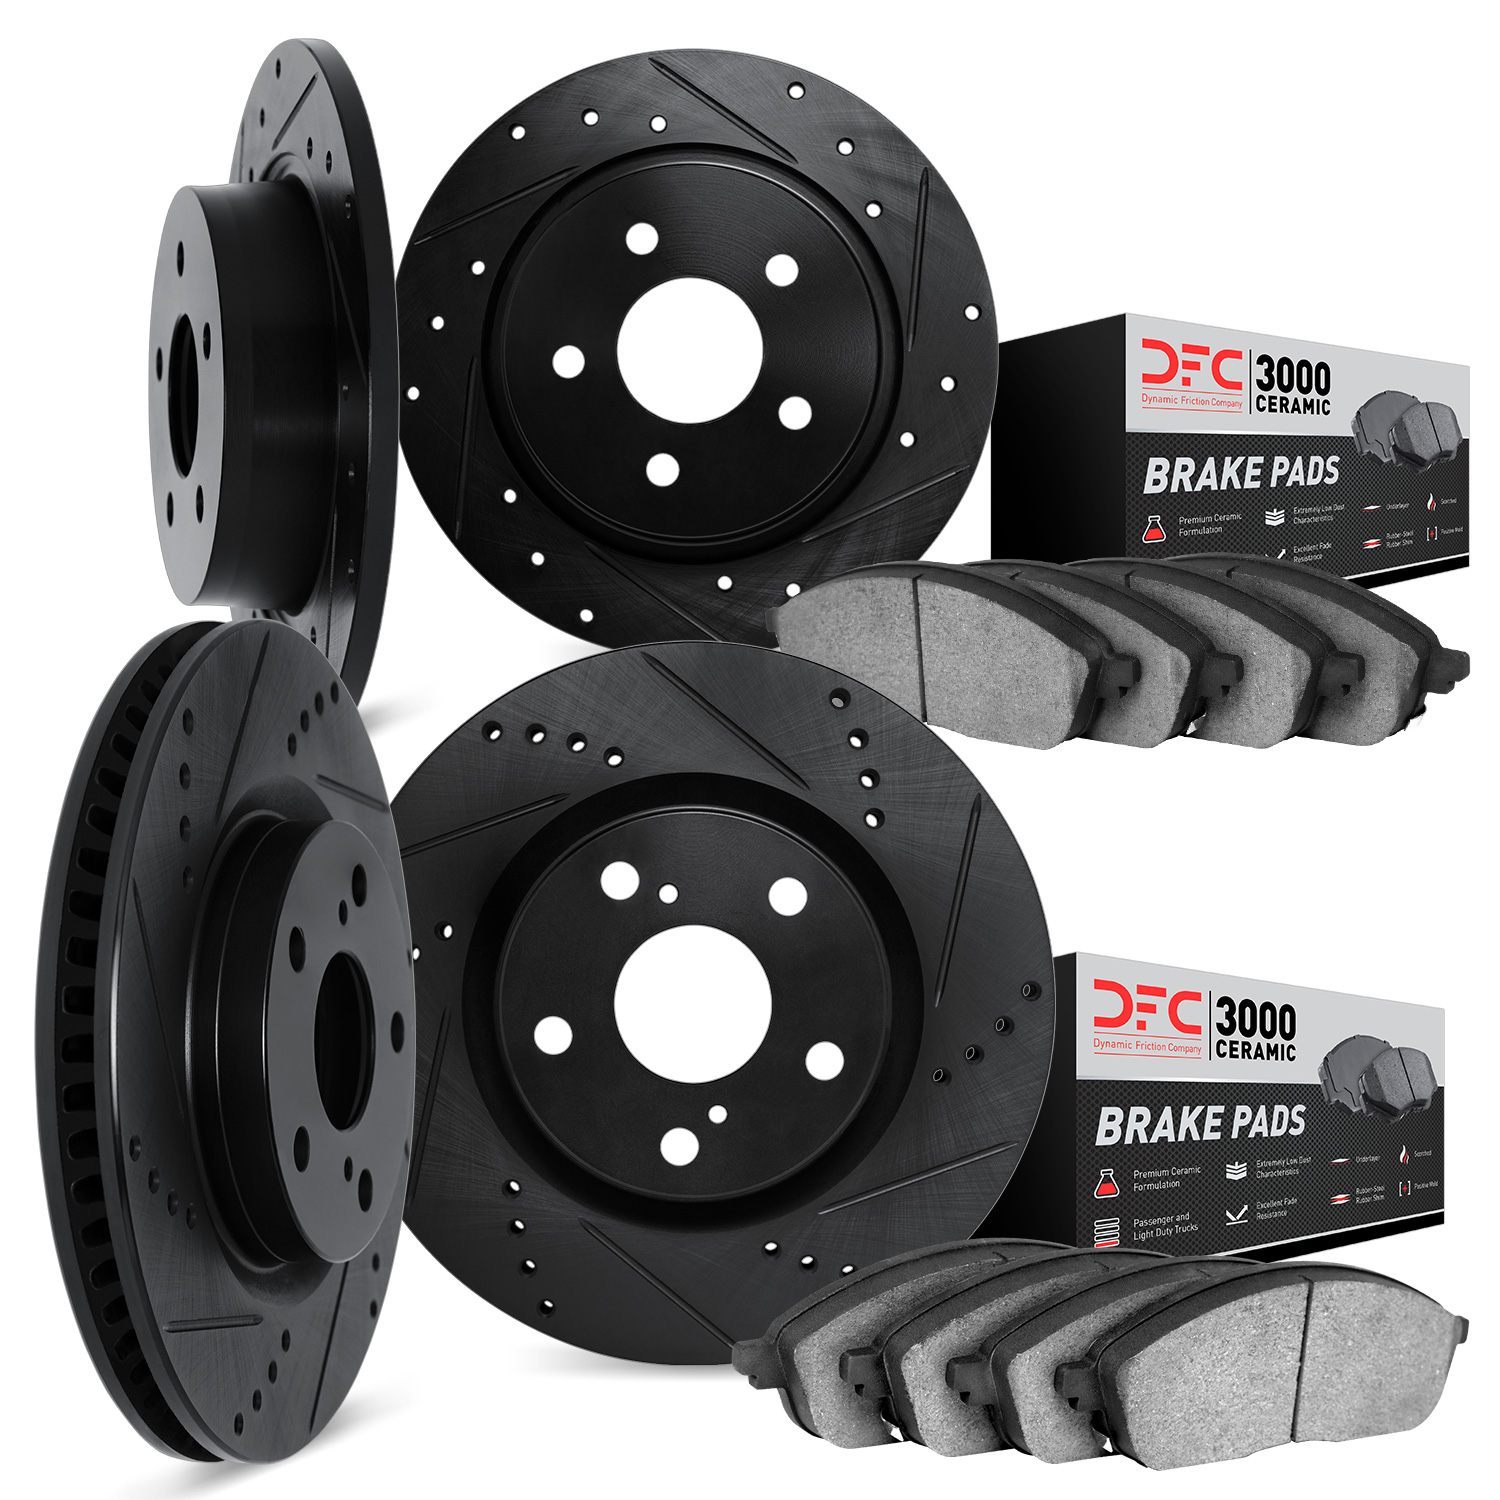 8304-31036 Drilled/Slotted Brake Rotors with 3000-Series Ceramic Brake Pads Kit [Black], 1995-2001 BMW, Position: Front and Rear